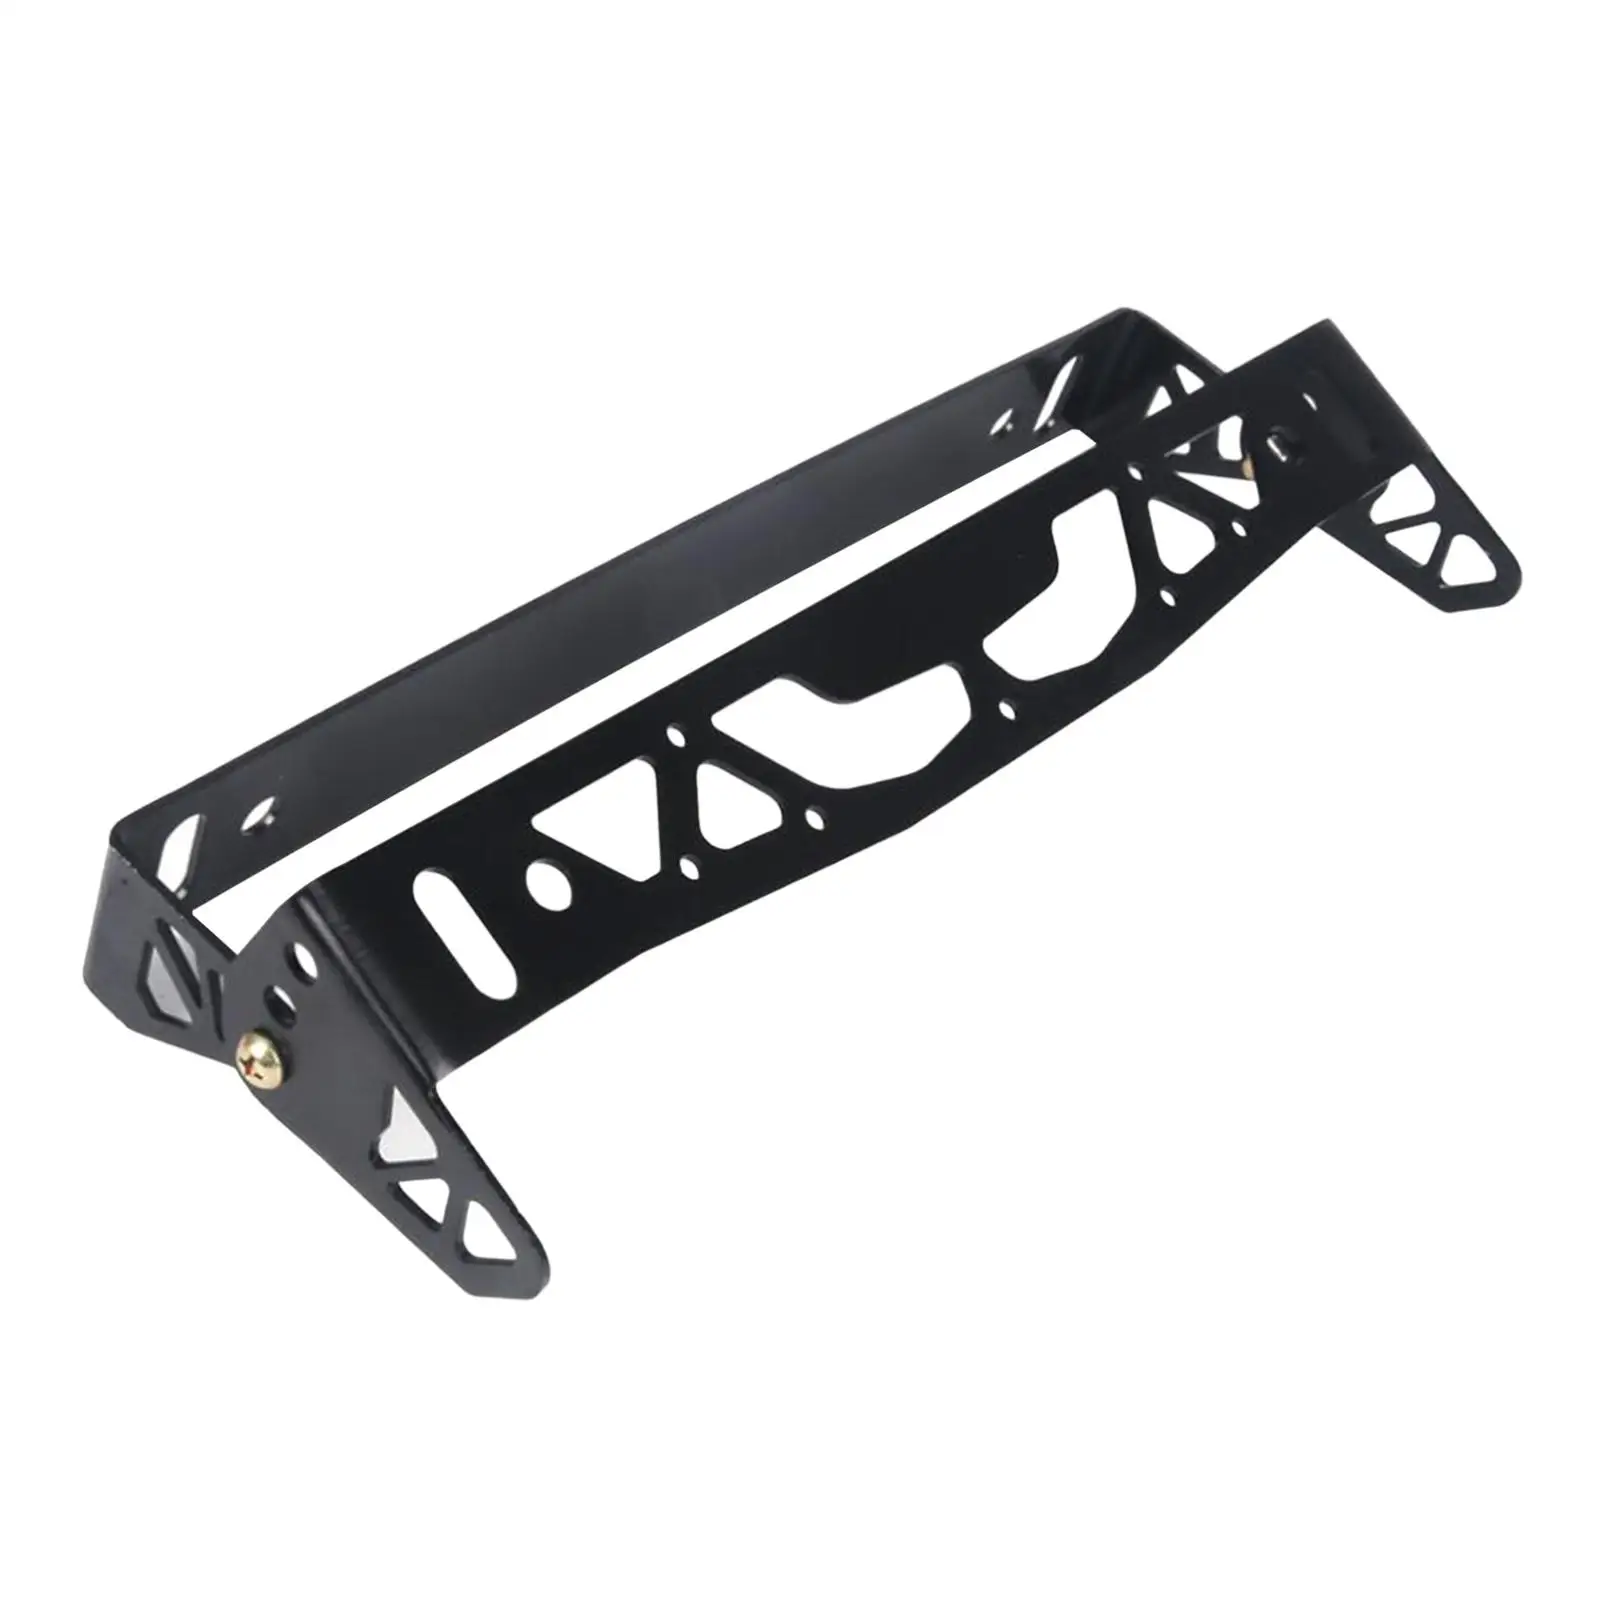 License Plate Frame Frame Adjustable Assembly Durable Direct Replaces DIY